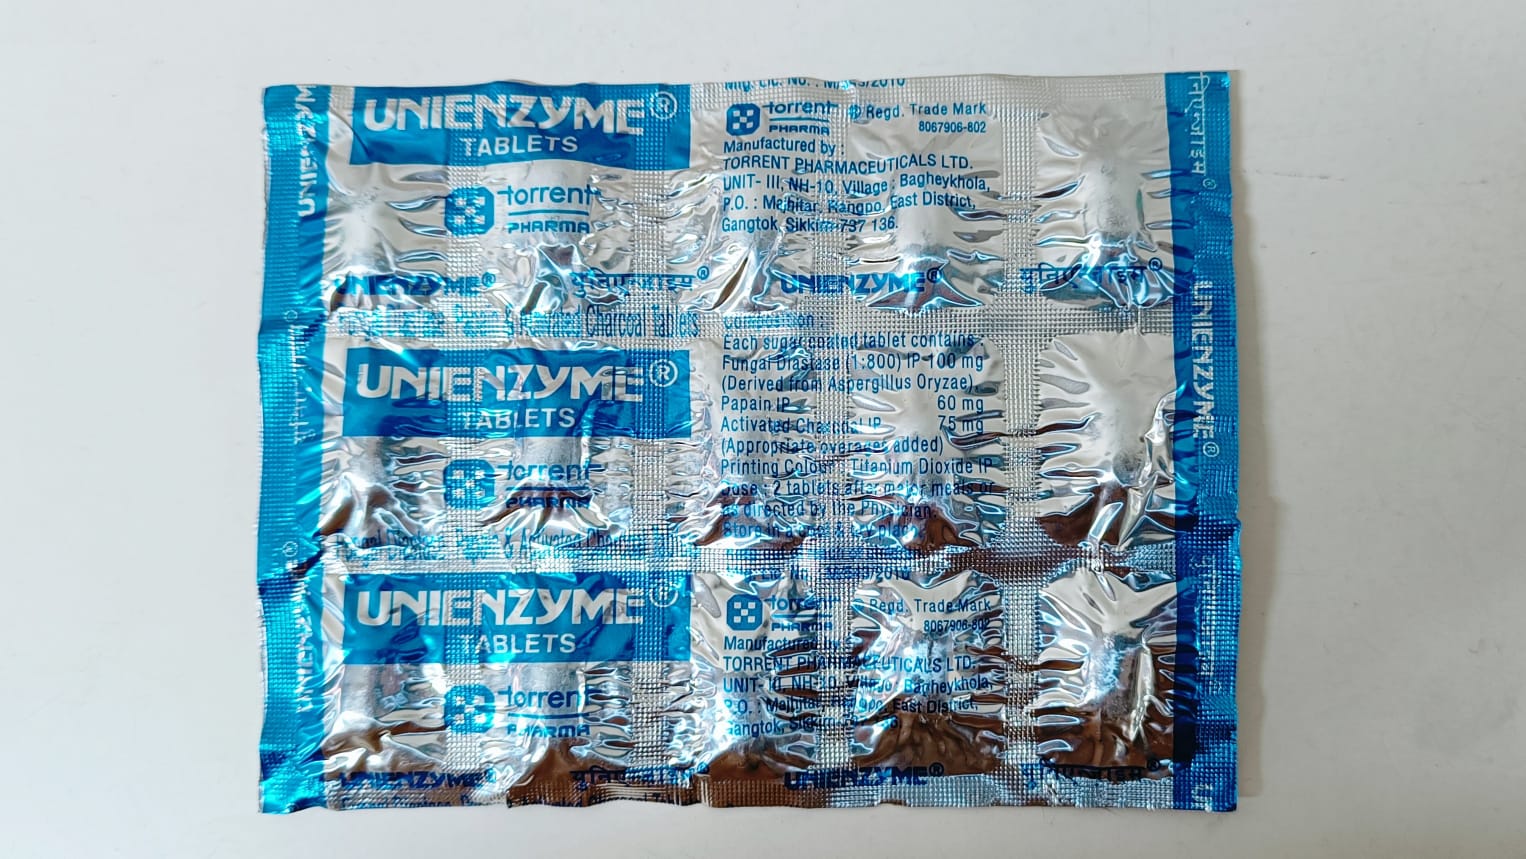 Unienzyme Tablet